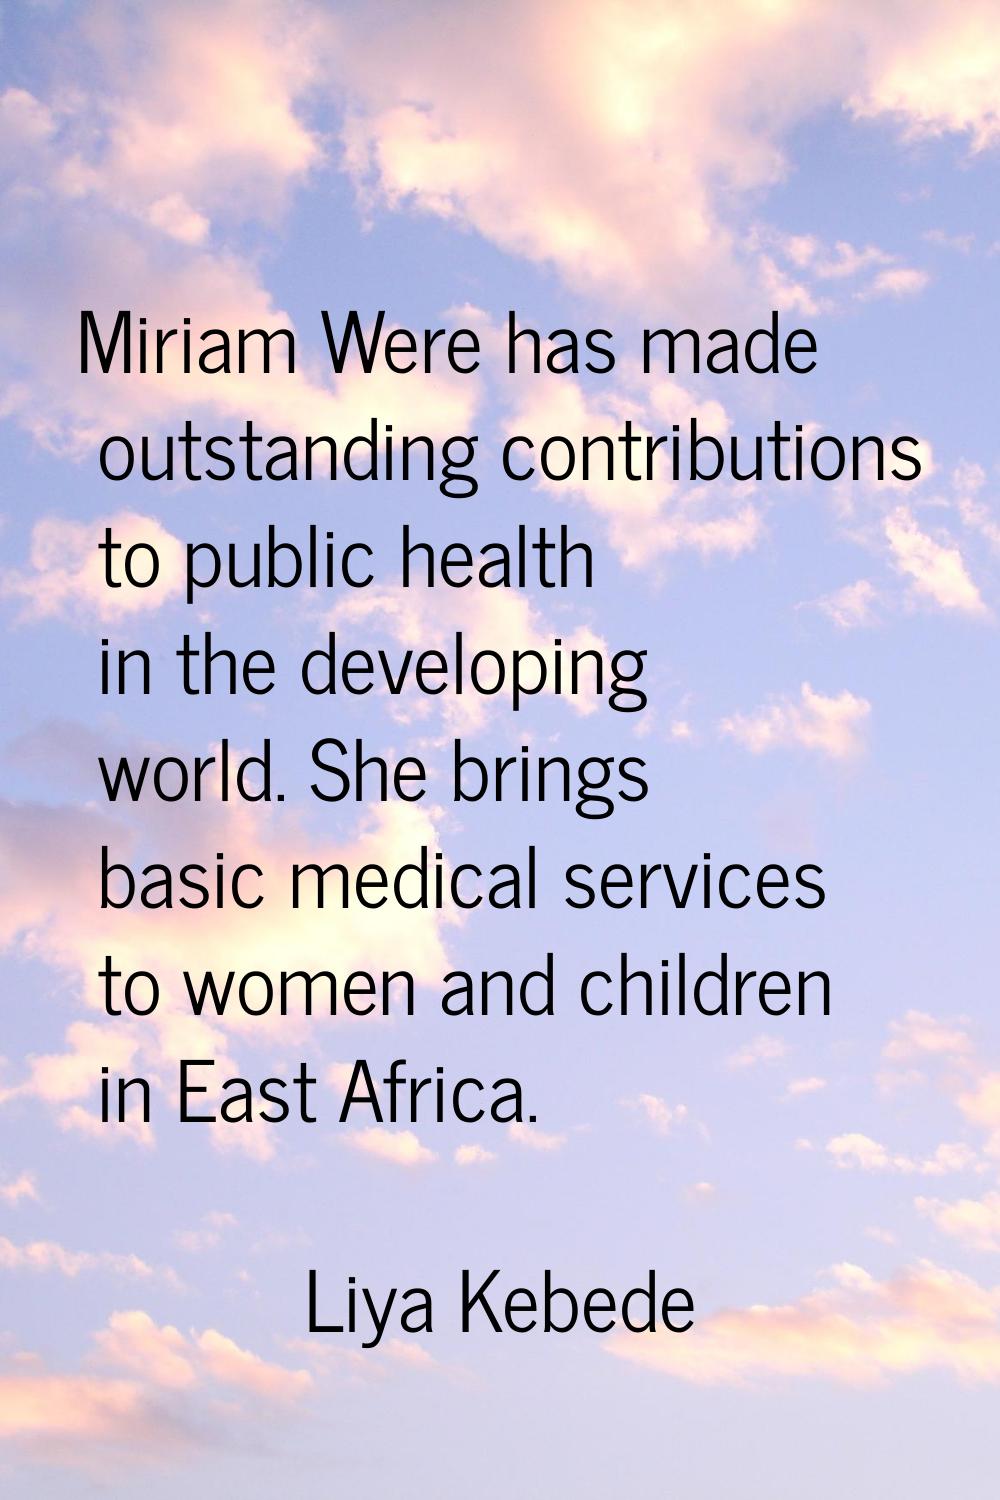 Miriam Were has made outstanding contributions to public health in the developing world. She brings